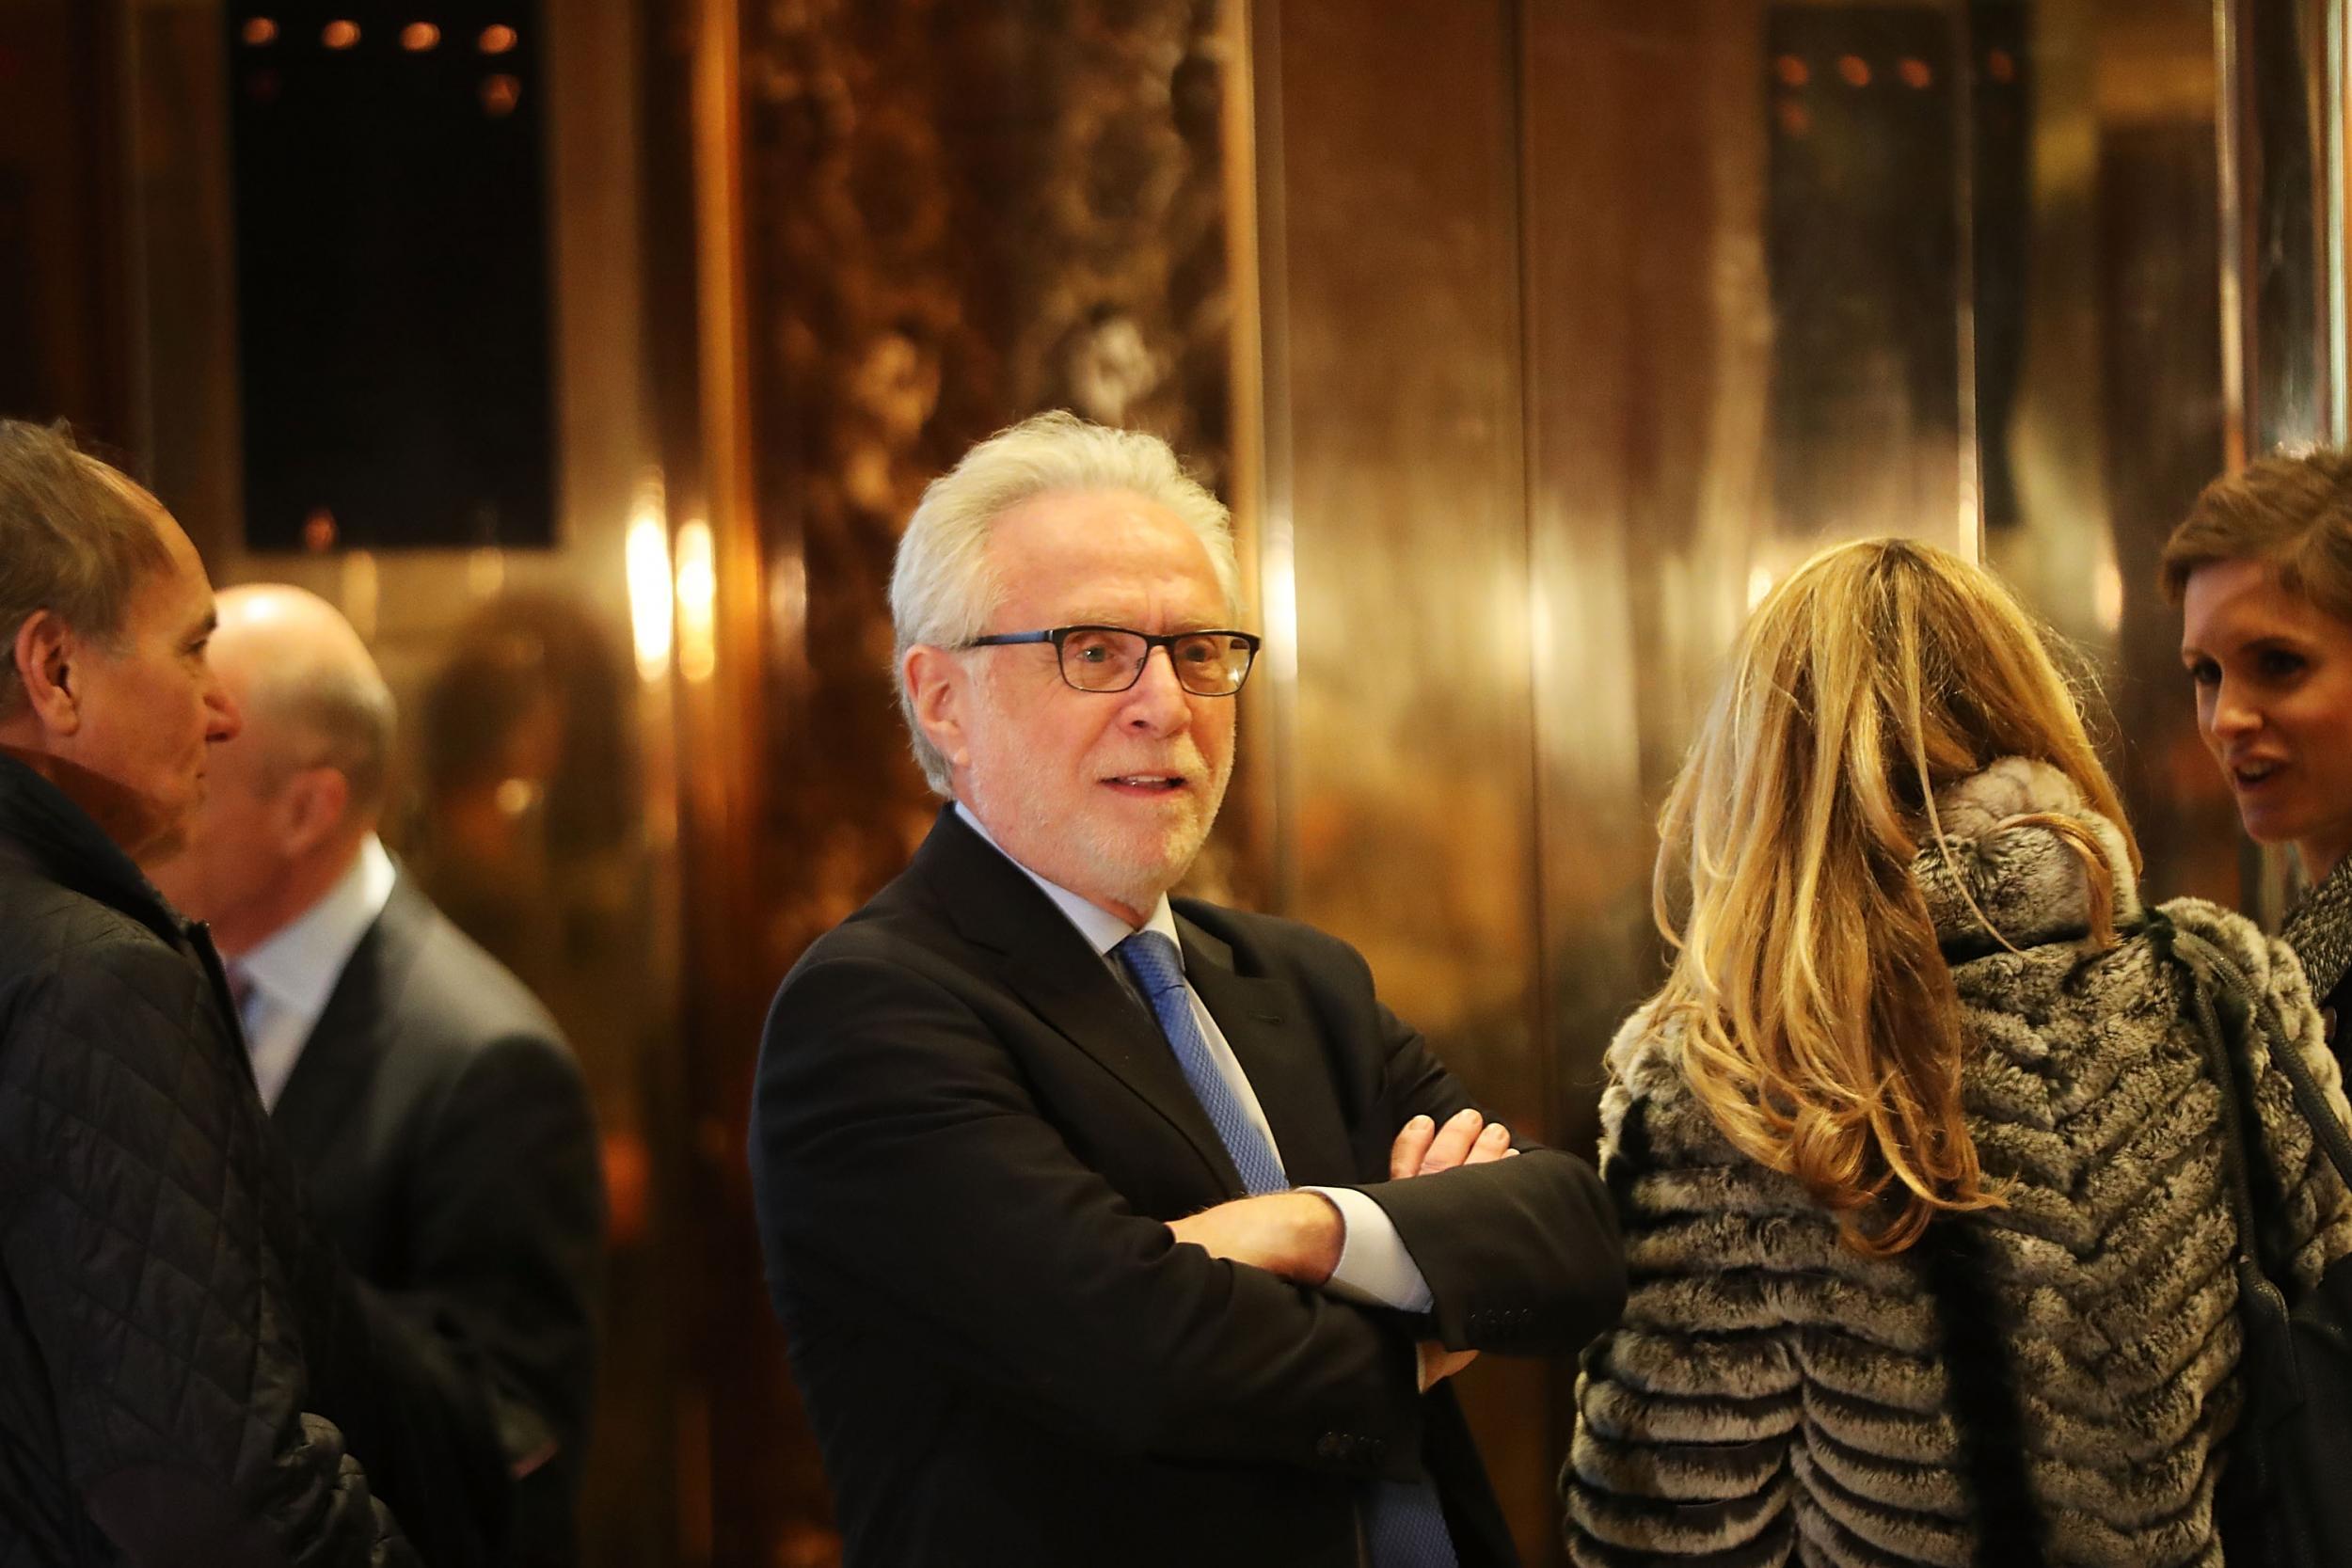 Wolf Blitzer, veteran anchor of CNN, was one of the TV personalities at Trump Tower on Monday